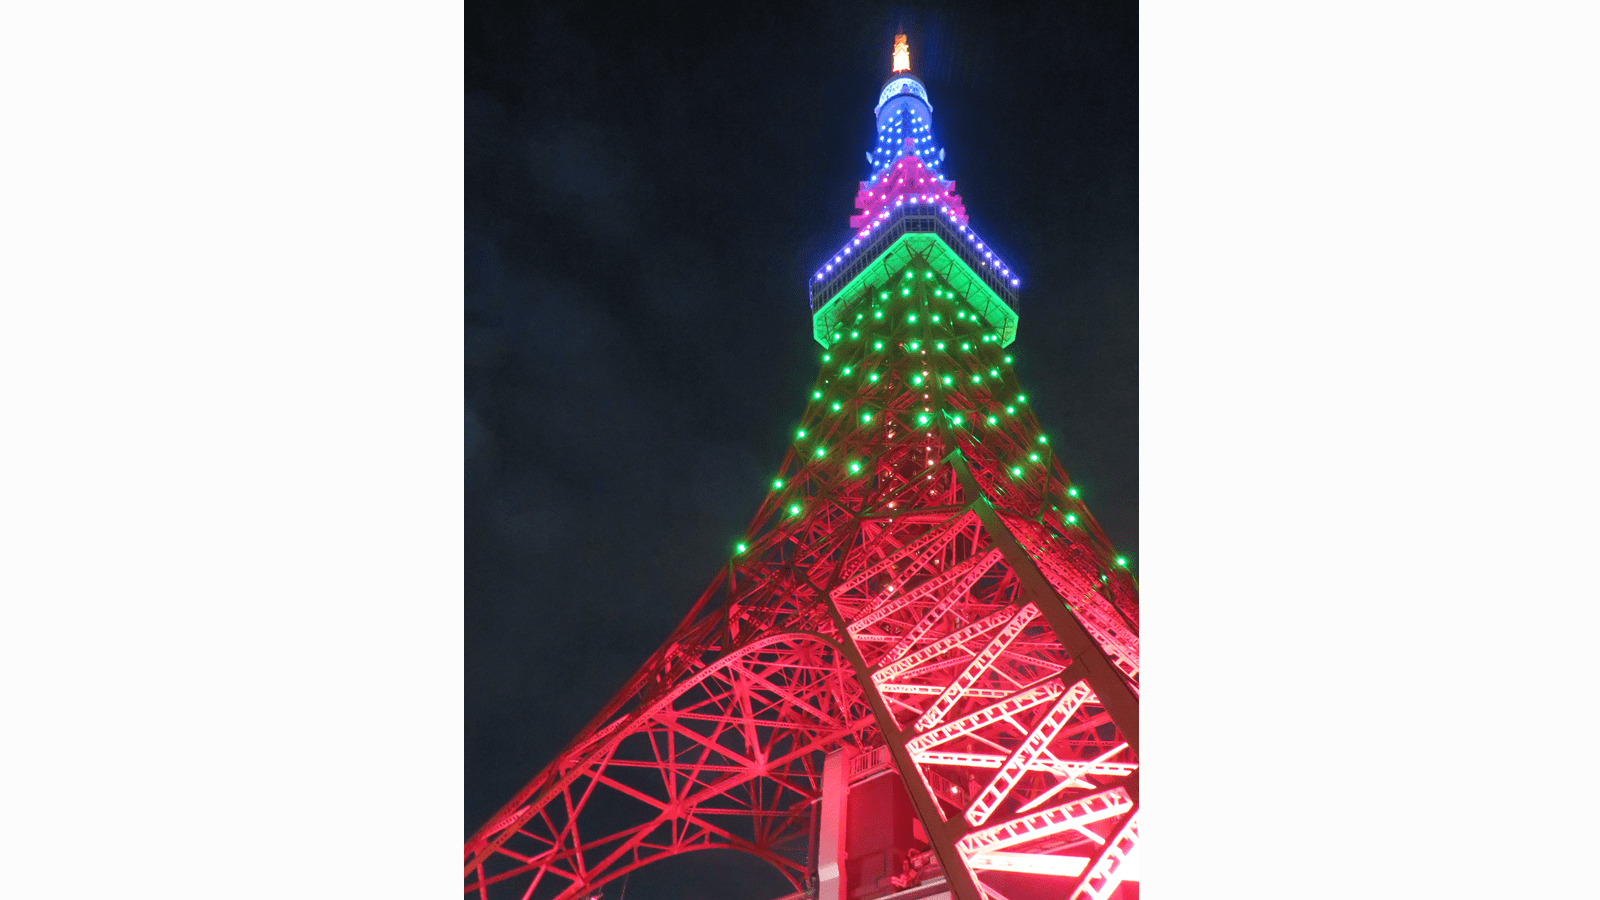 The Tokyo Tower in Japan lit up in the pink, green, purple and blue colors of Rare Disease Day.